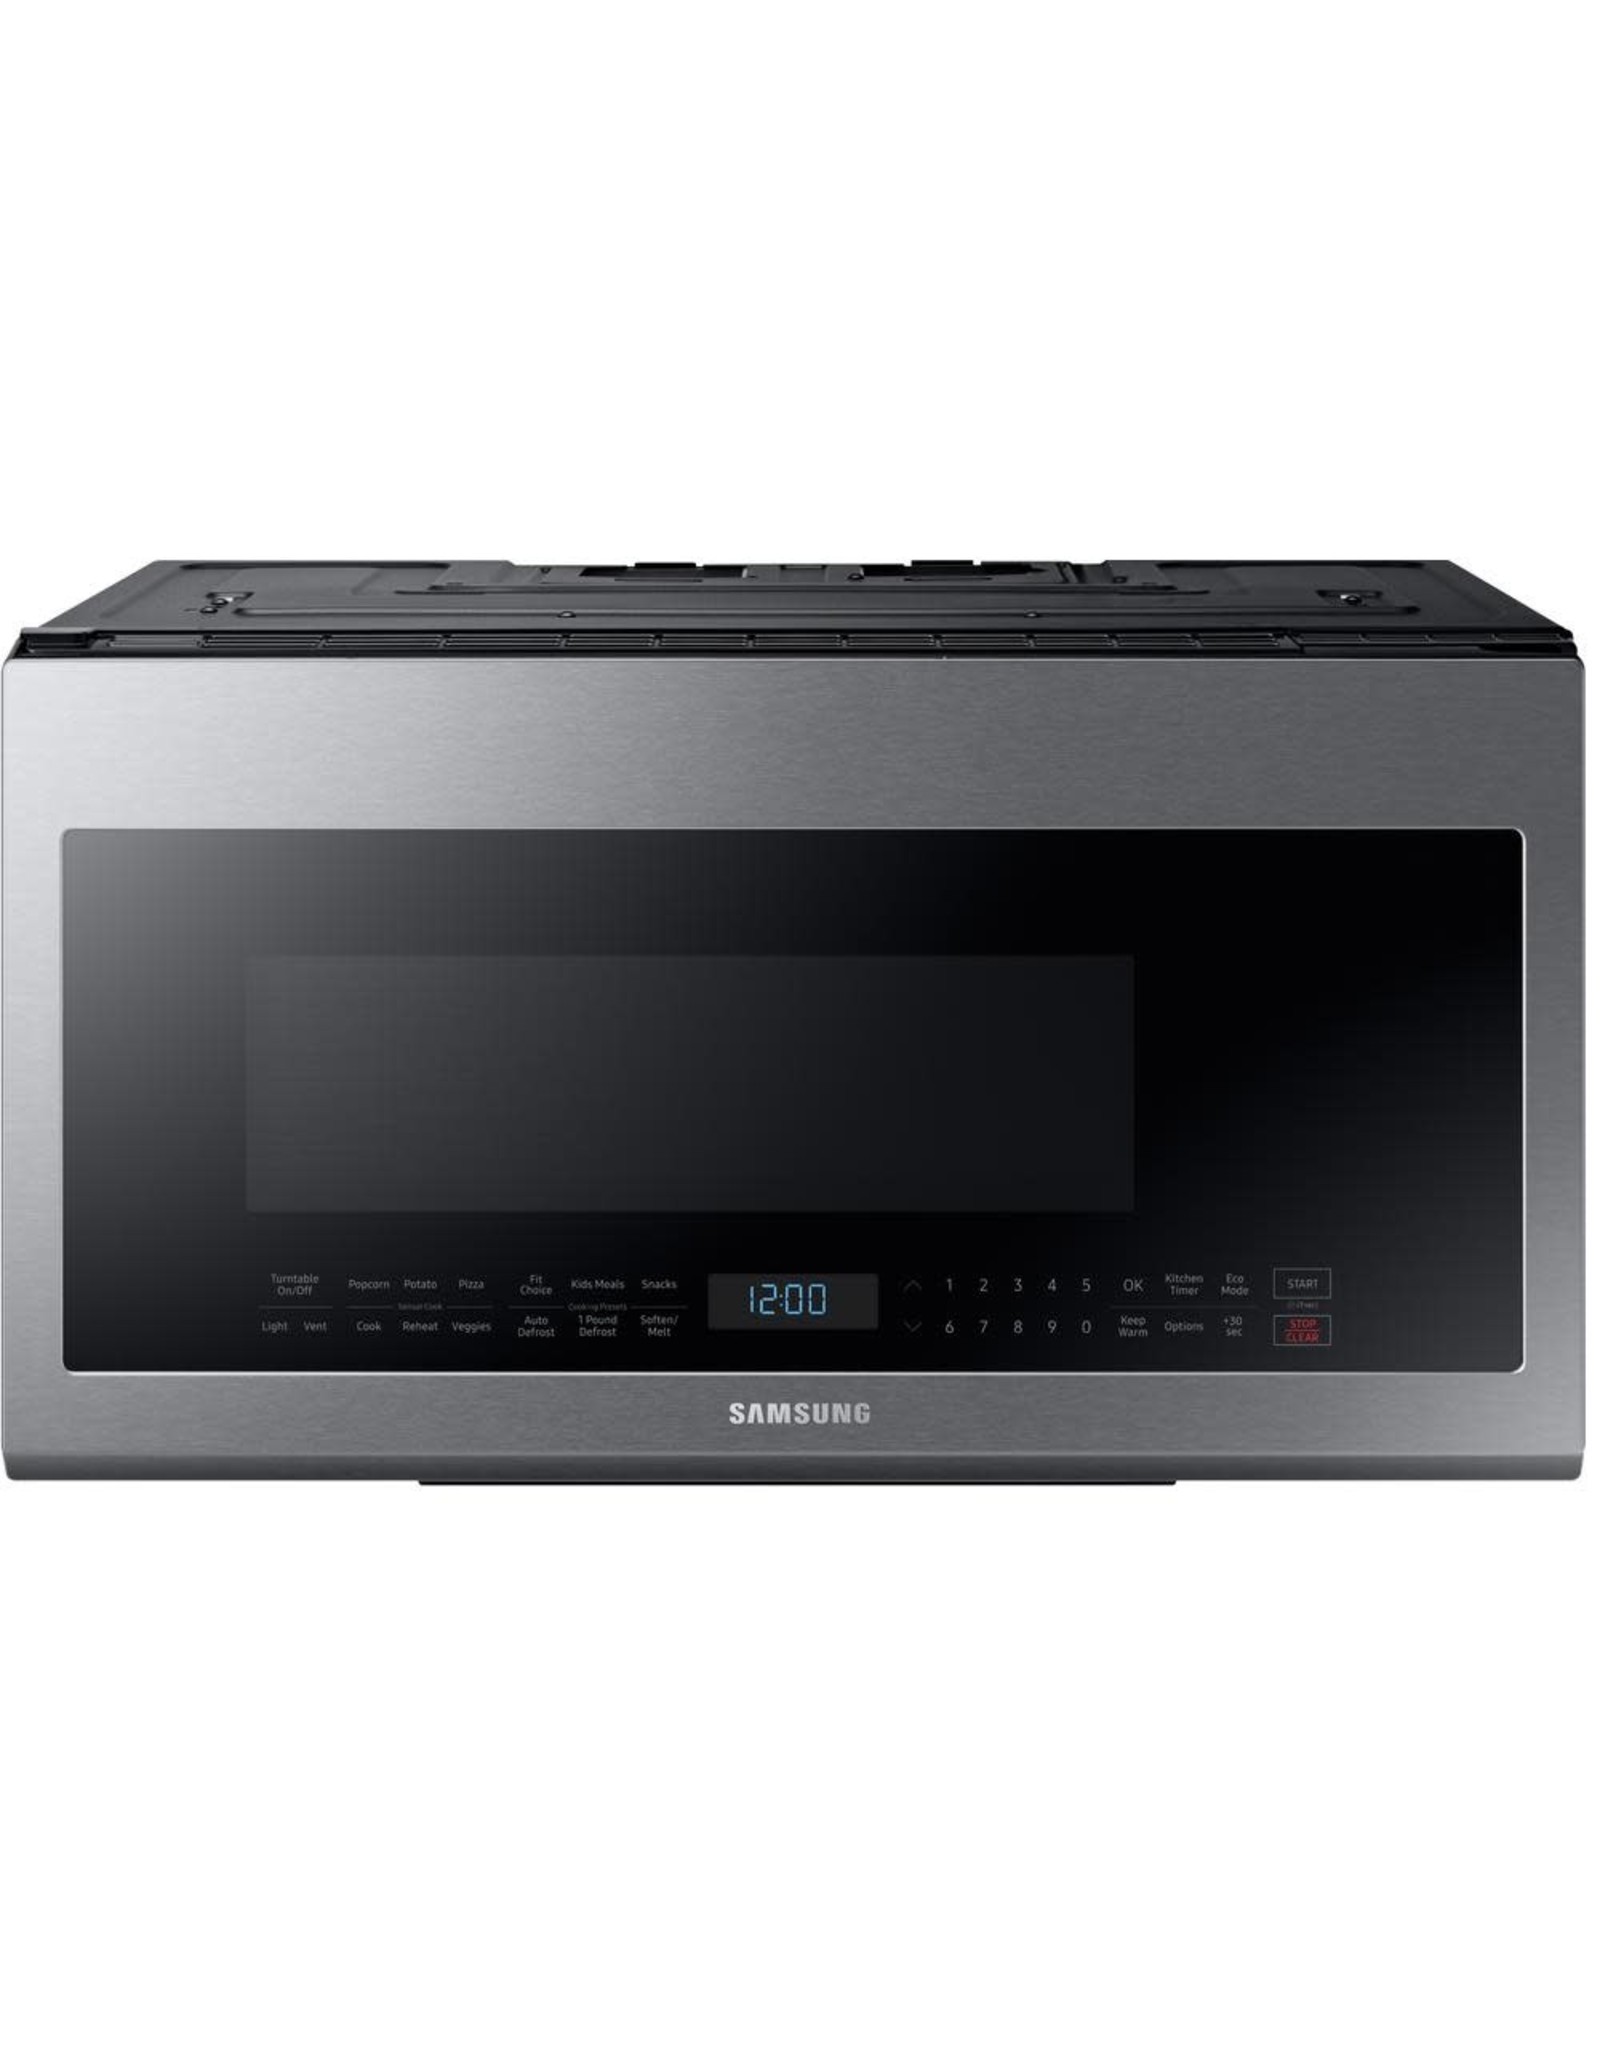 ME21M706BAS Samsung 30 in. W 2.1 cu. ft. Over the Range Microwave in Fingerprint Resistant Stainless Steel with Sensor Cooking